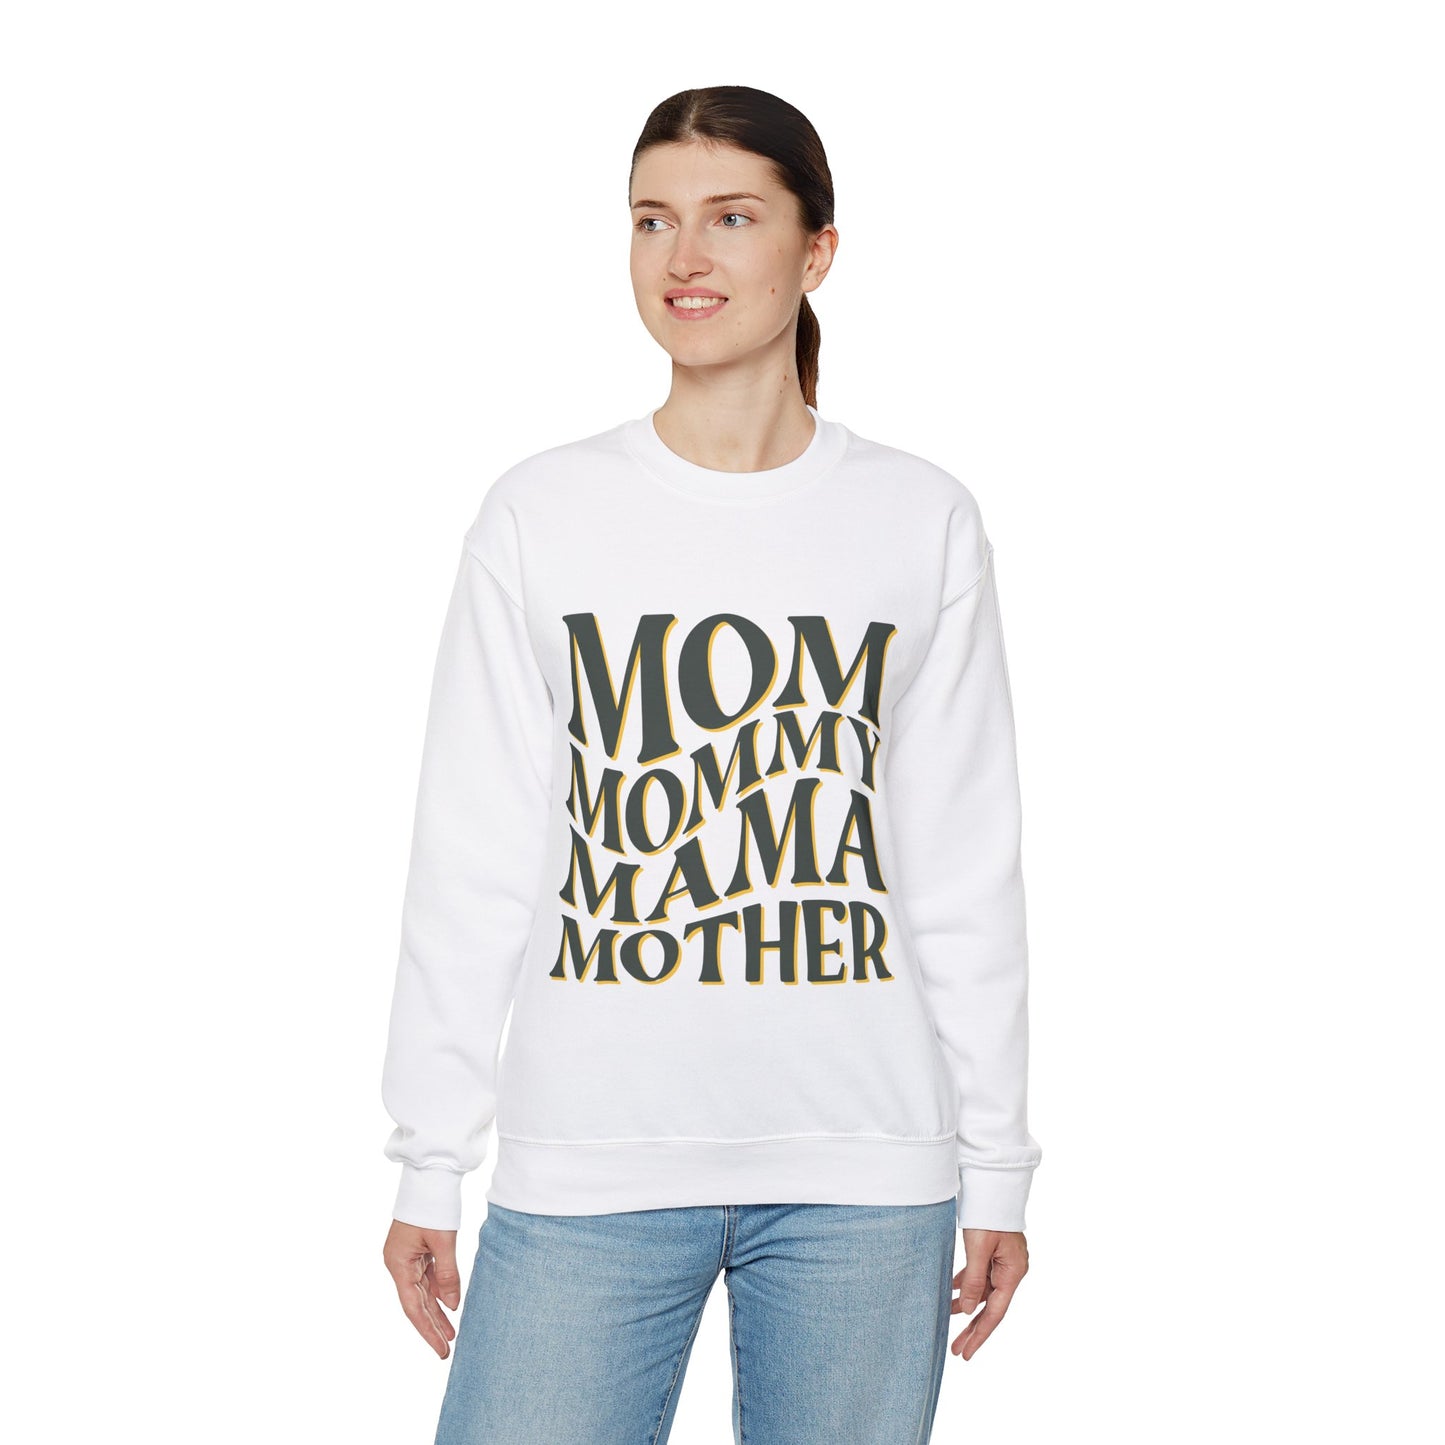 Personalized premium sweatshirt for mom, comfort and style, mother's day, gifts for mom's day, custom mama, mommy